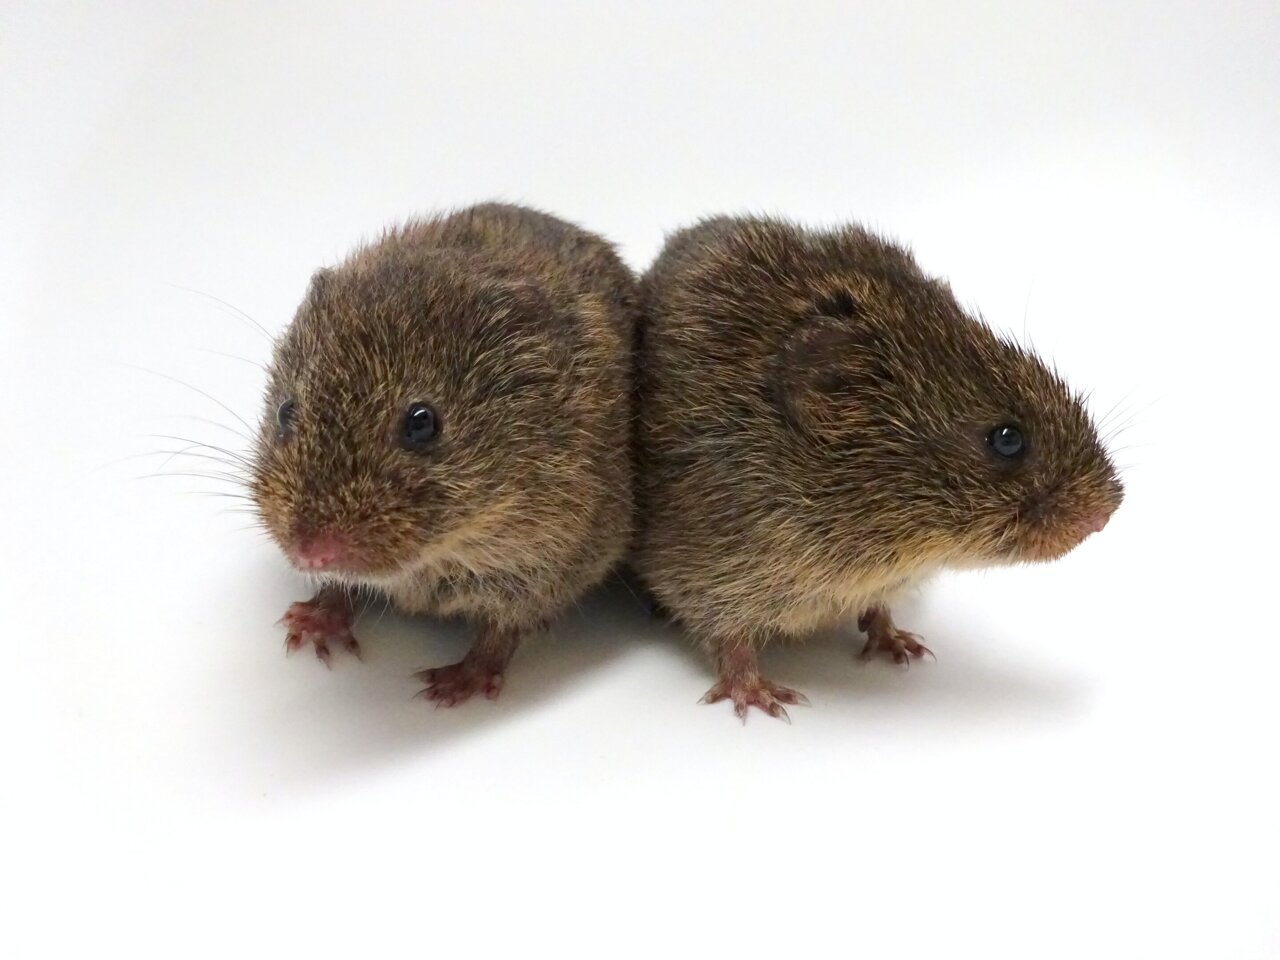 Social Motivation In Voles Differs By Species And Sex